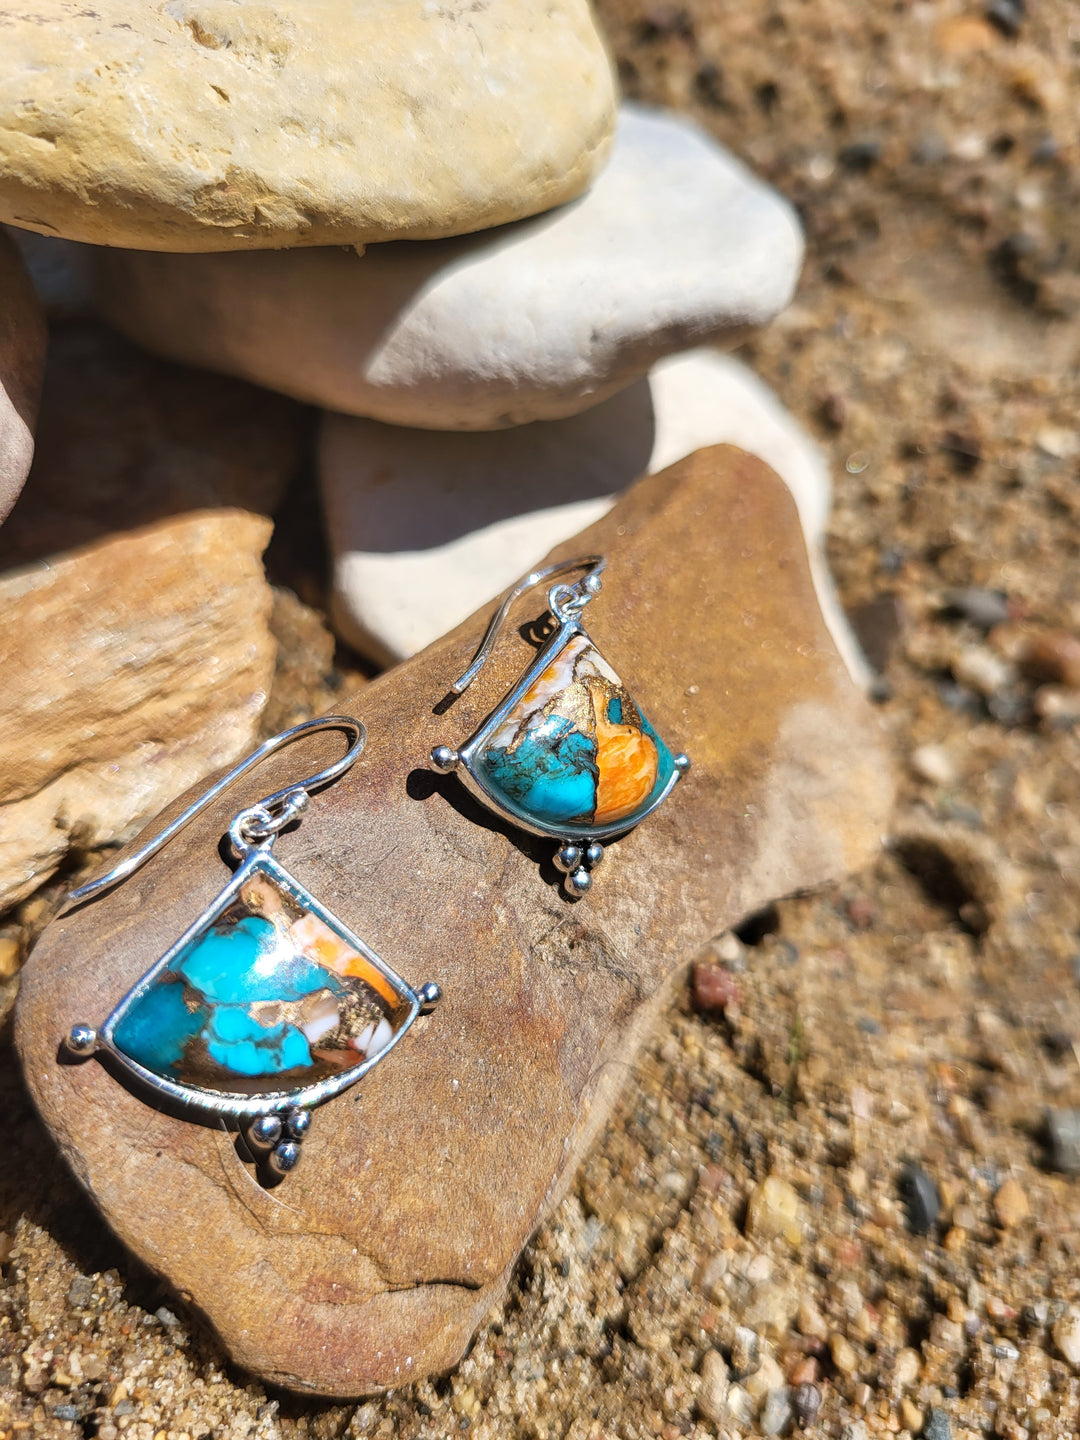 These earrings are a versatile piece that can be worn by any fashion discerning woman, adding a touch of glamour and sophistication to any outfit. For a truly luxurious look, pair these earrings with any of our turquoise and spiny oyster jewelry collection pieces.